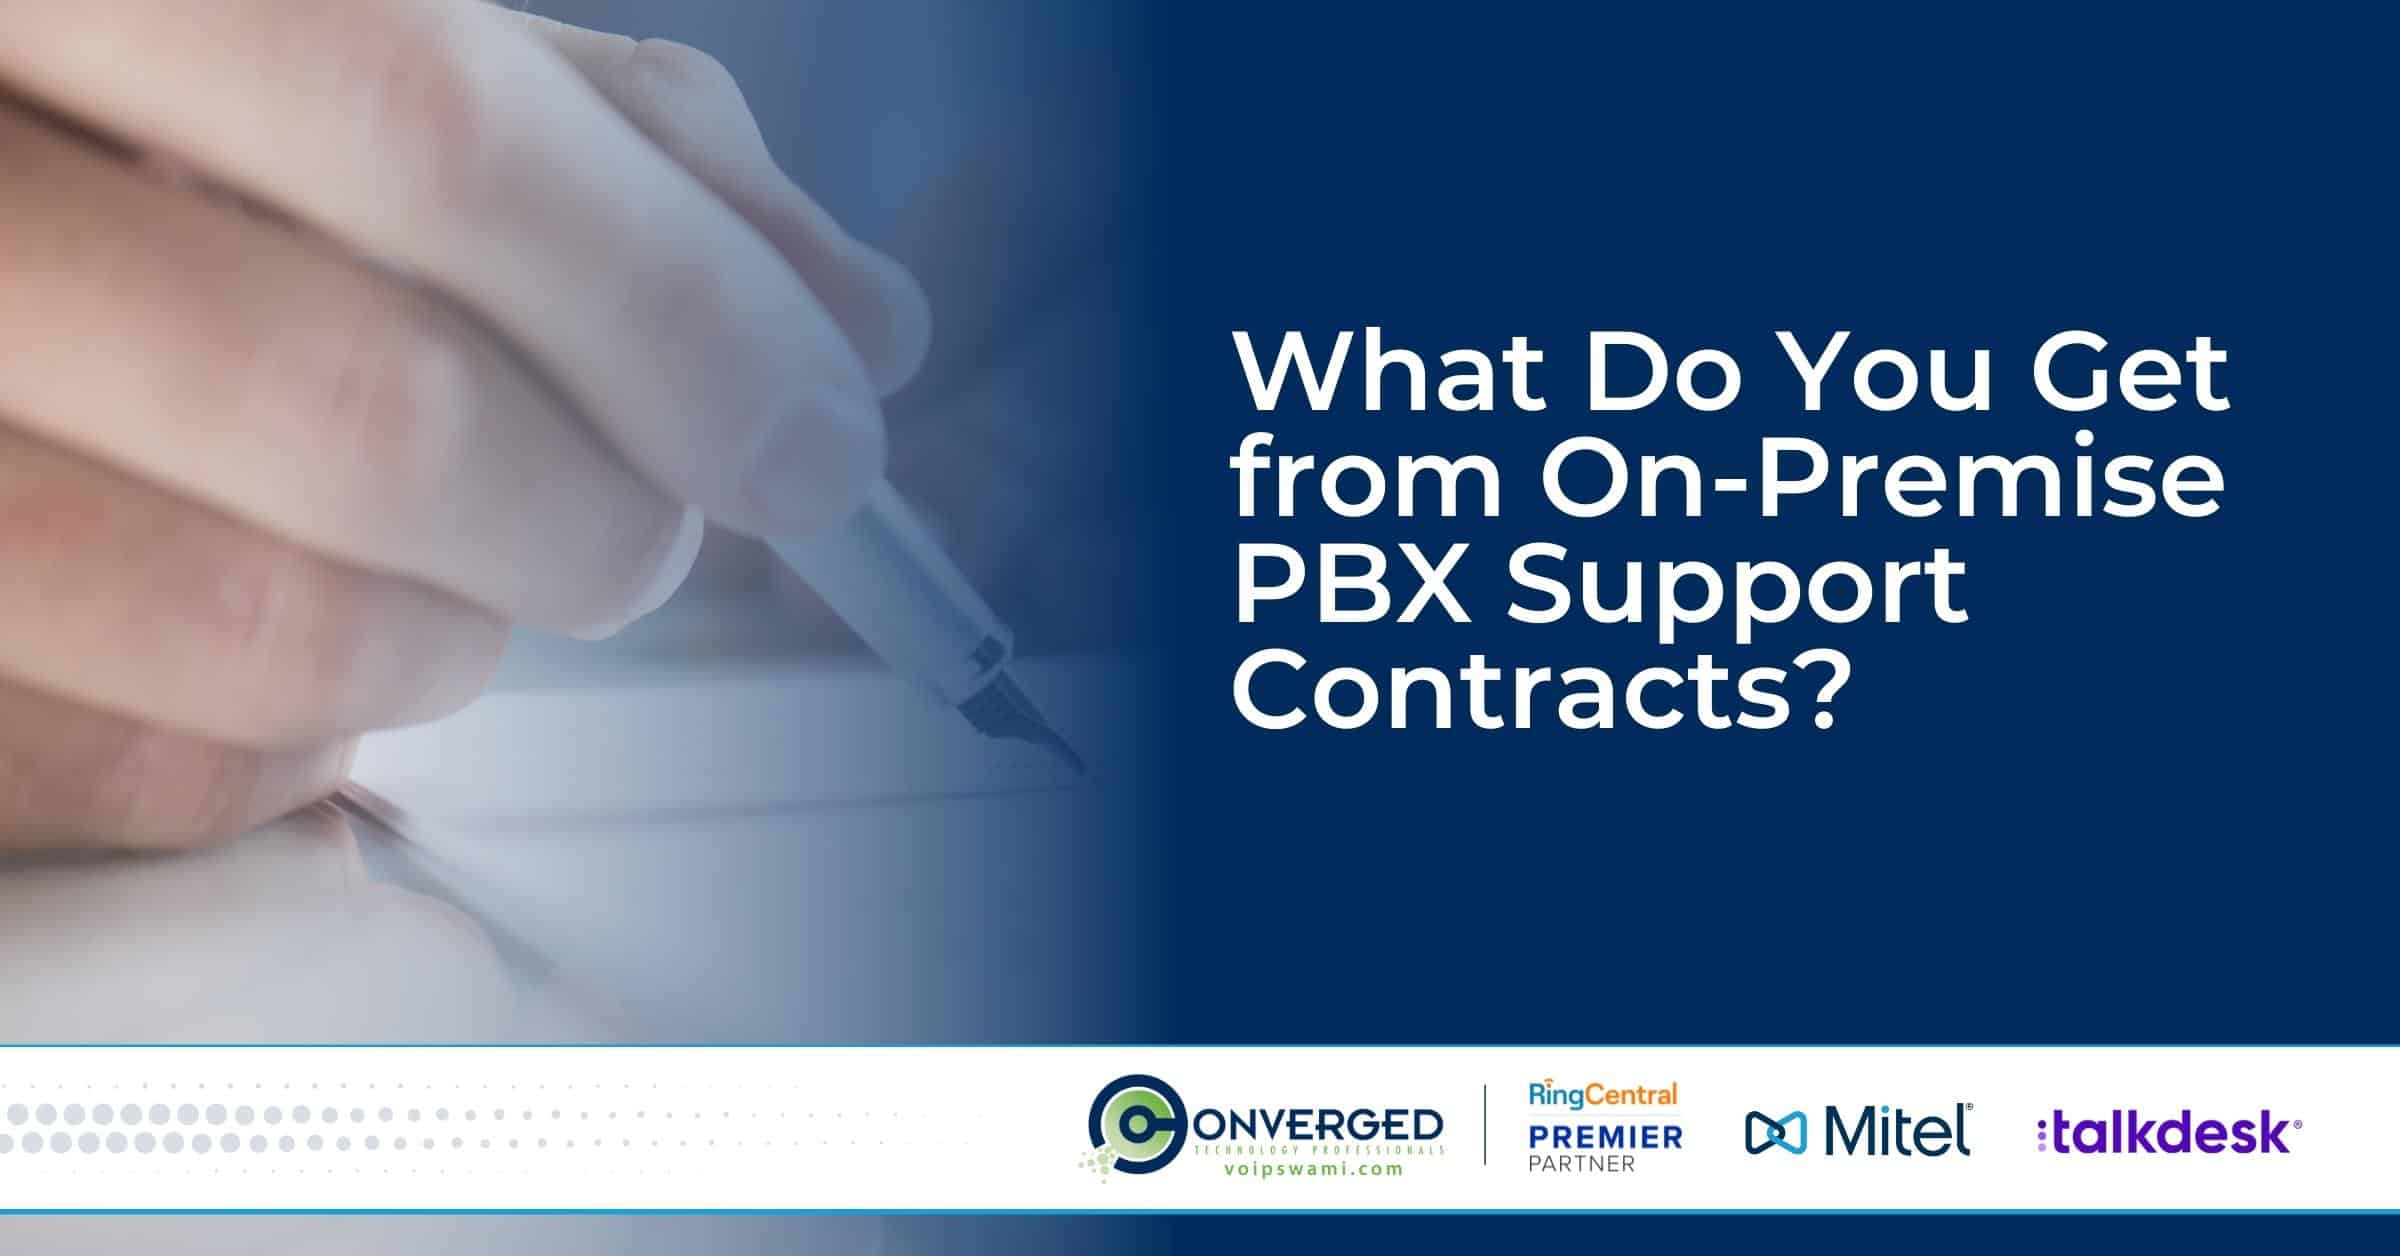 What Do You Get from On-Premise PBX Support Contracts